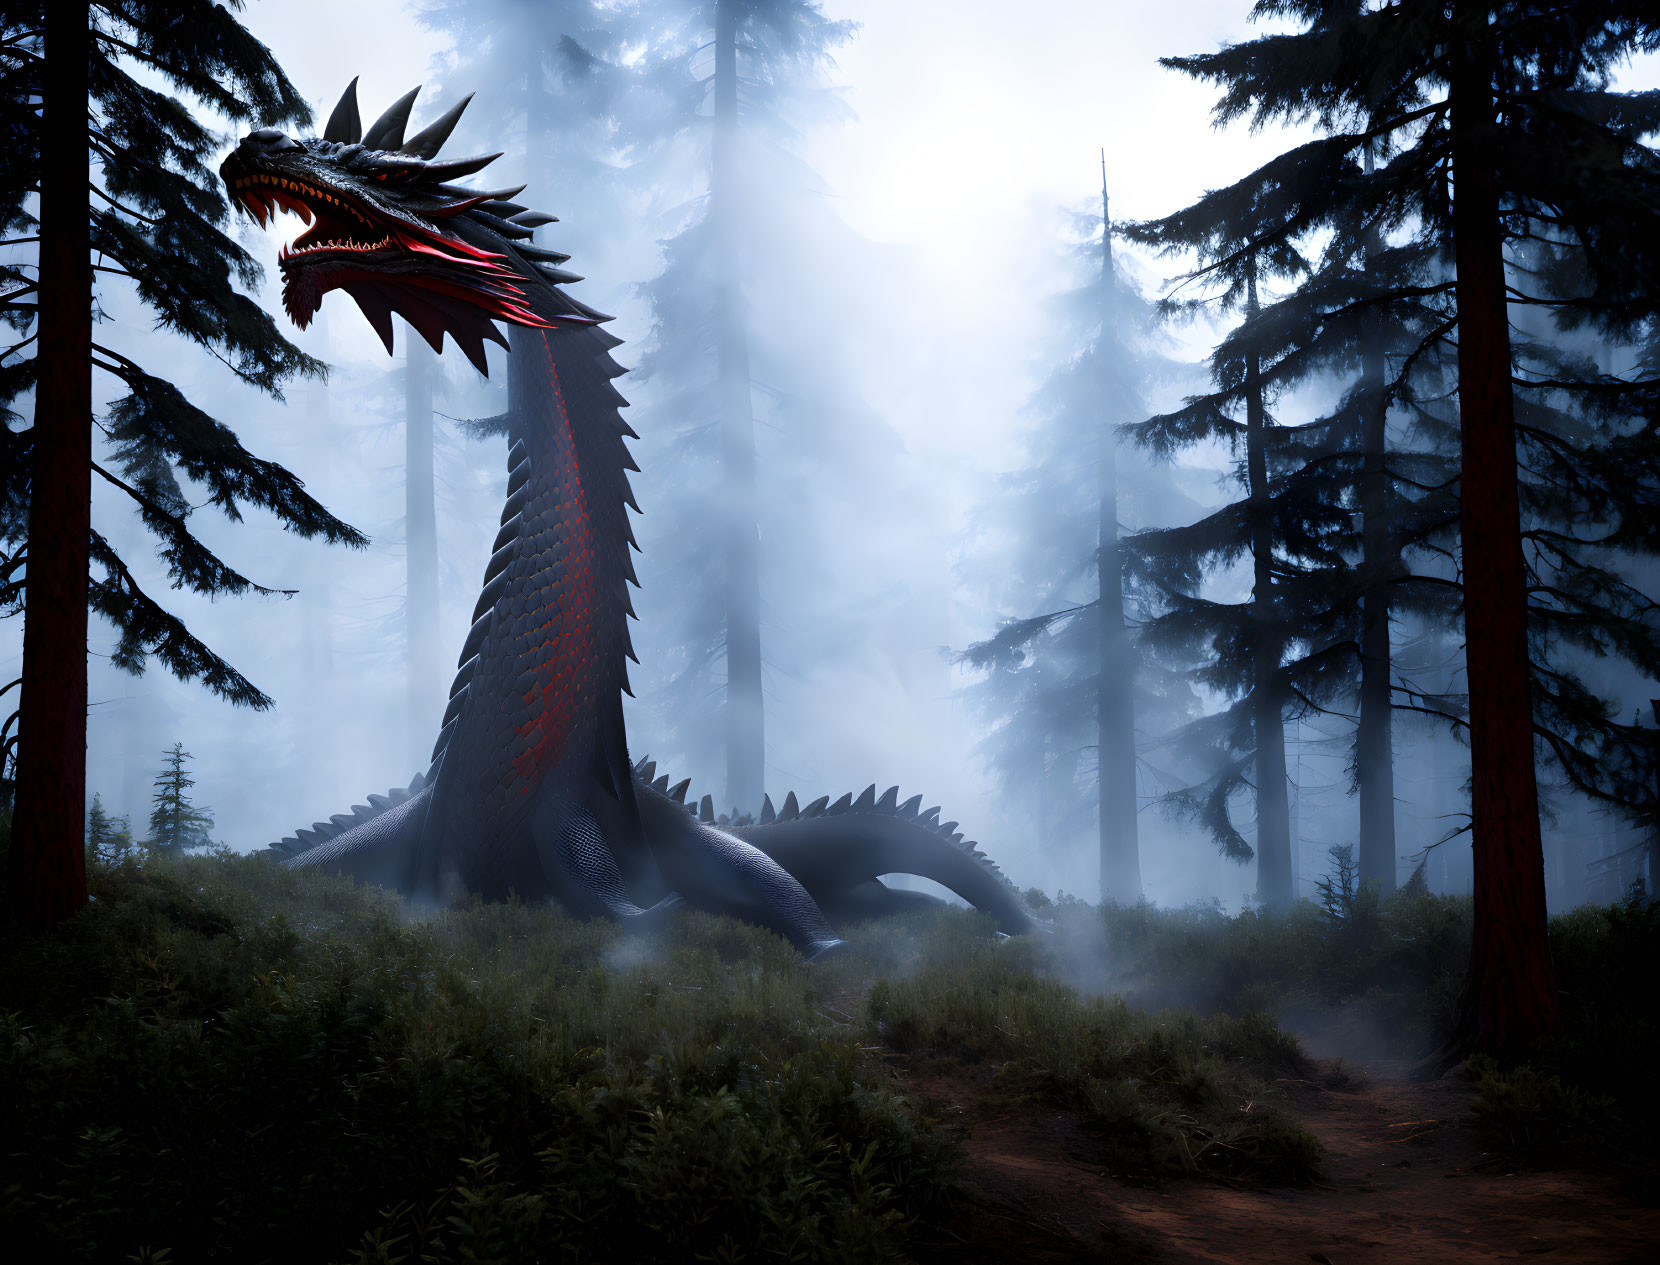 Black and red dragon roaring in misty forest among pine trees